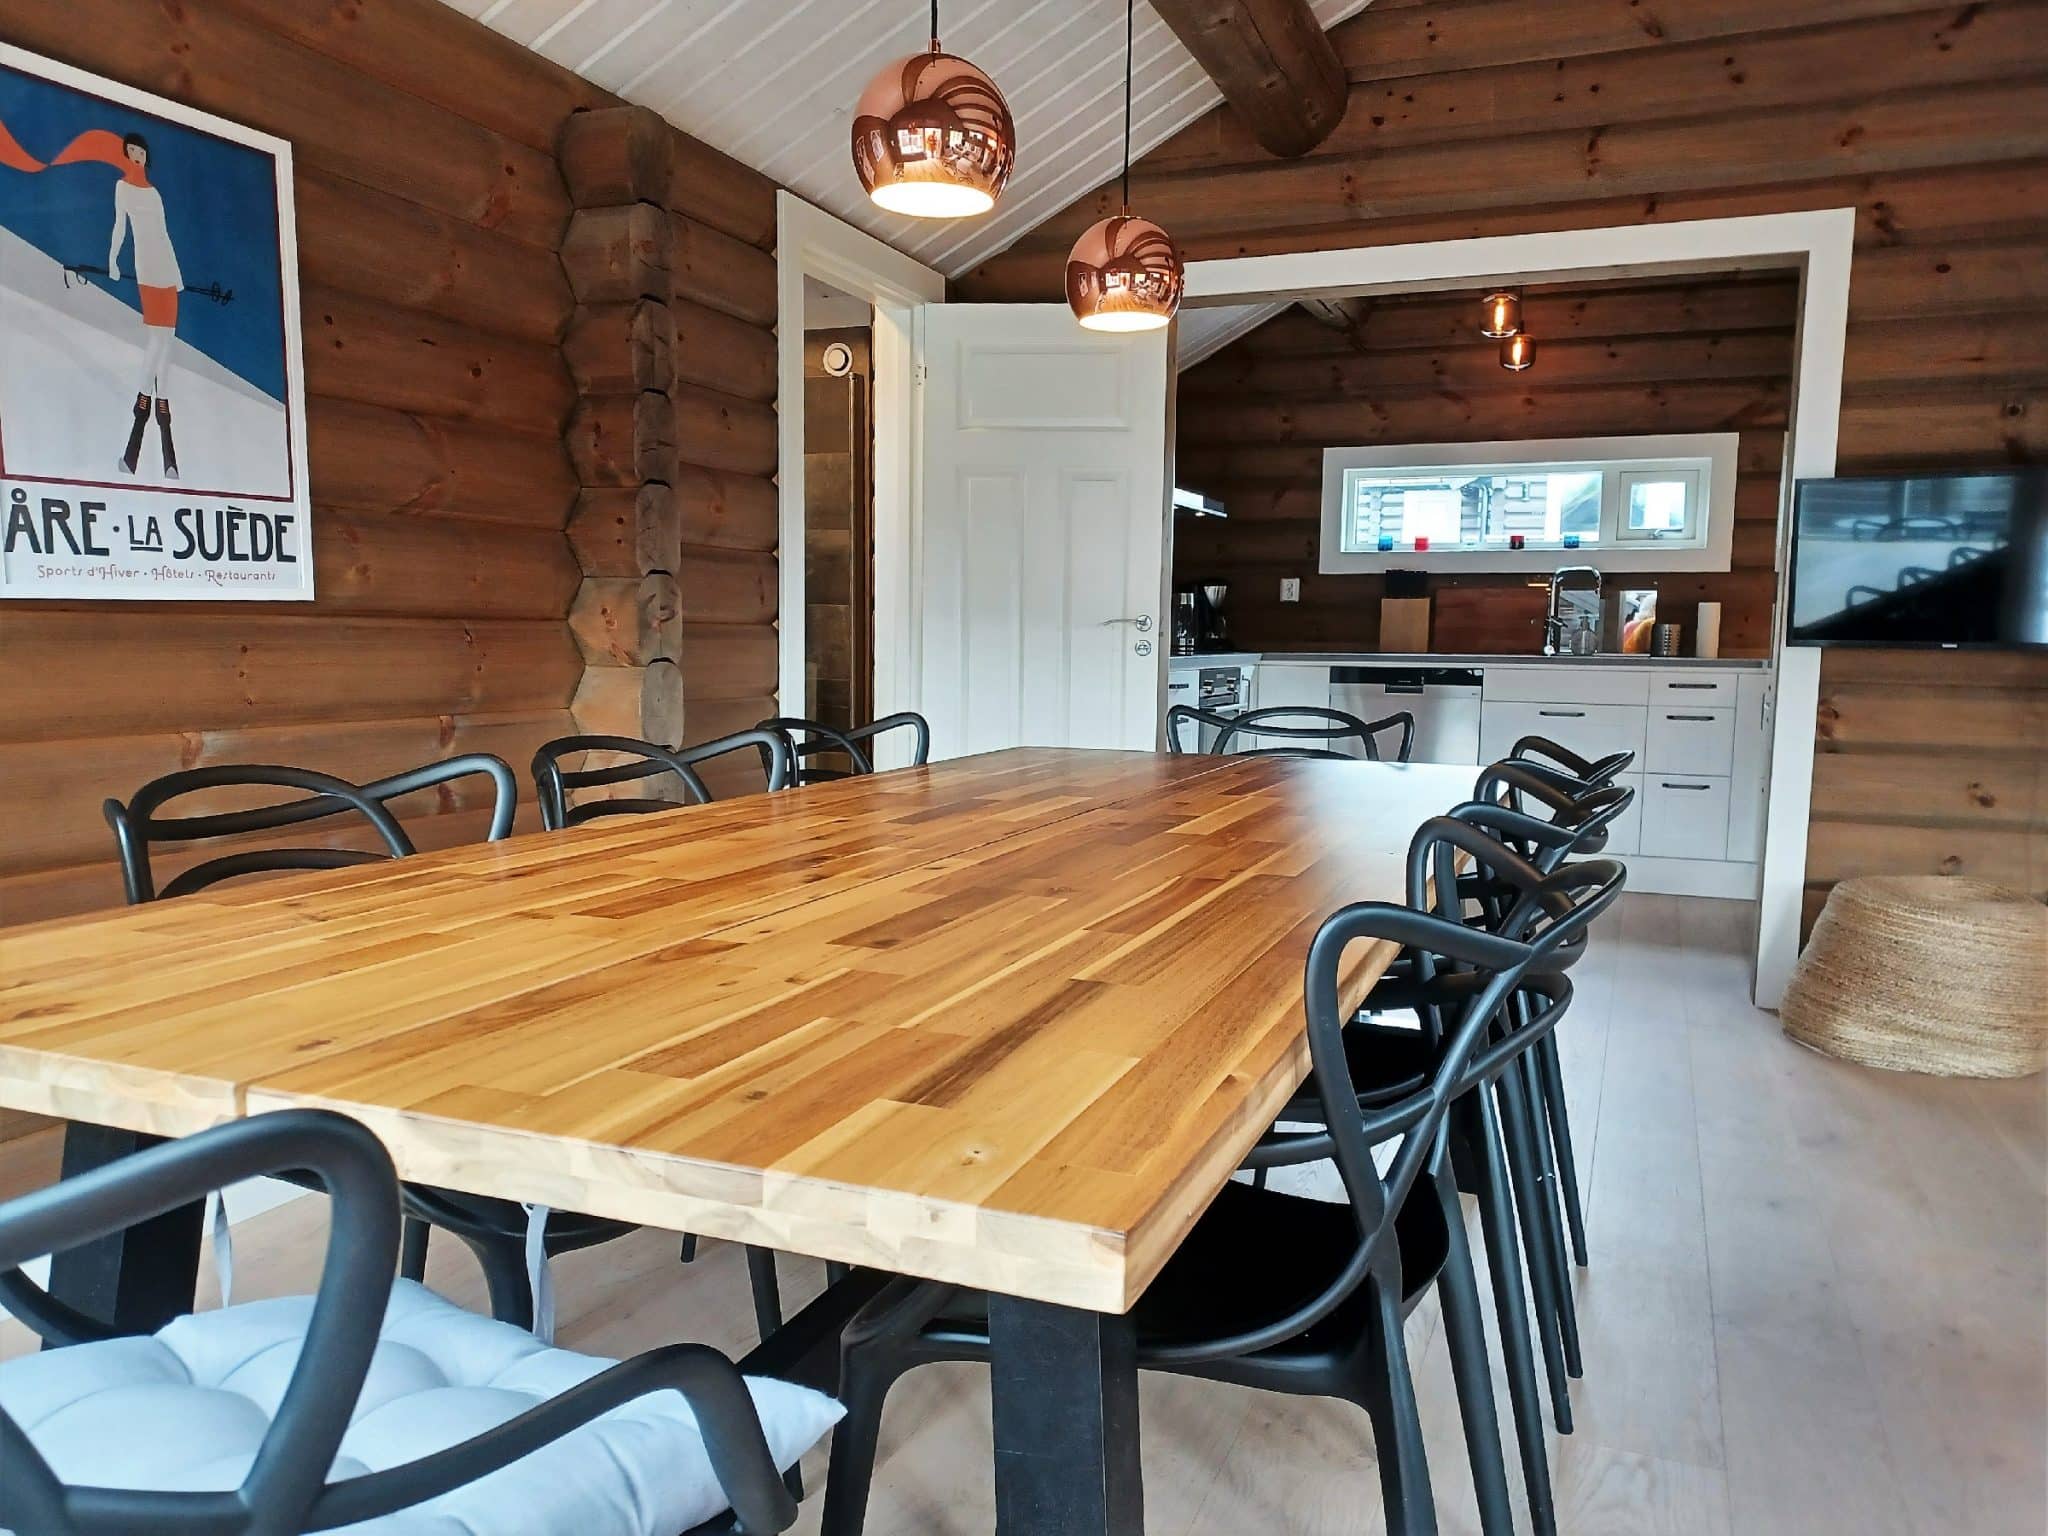 Dining area and kitchen in semi-detached house.